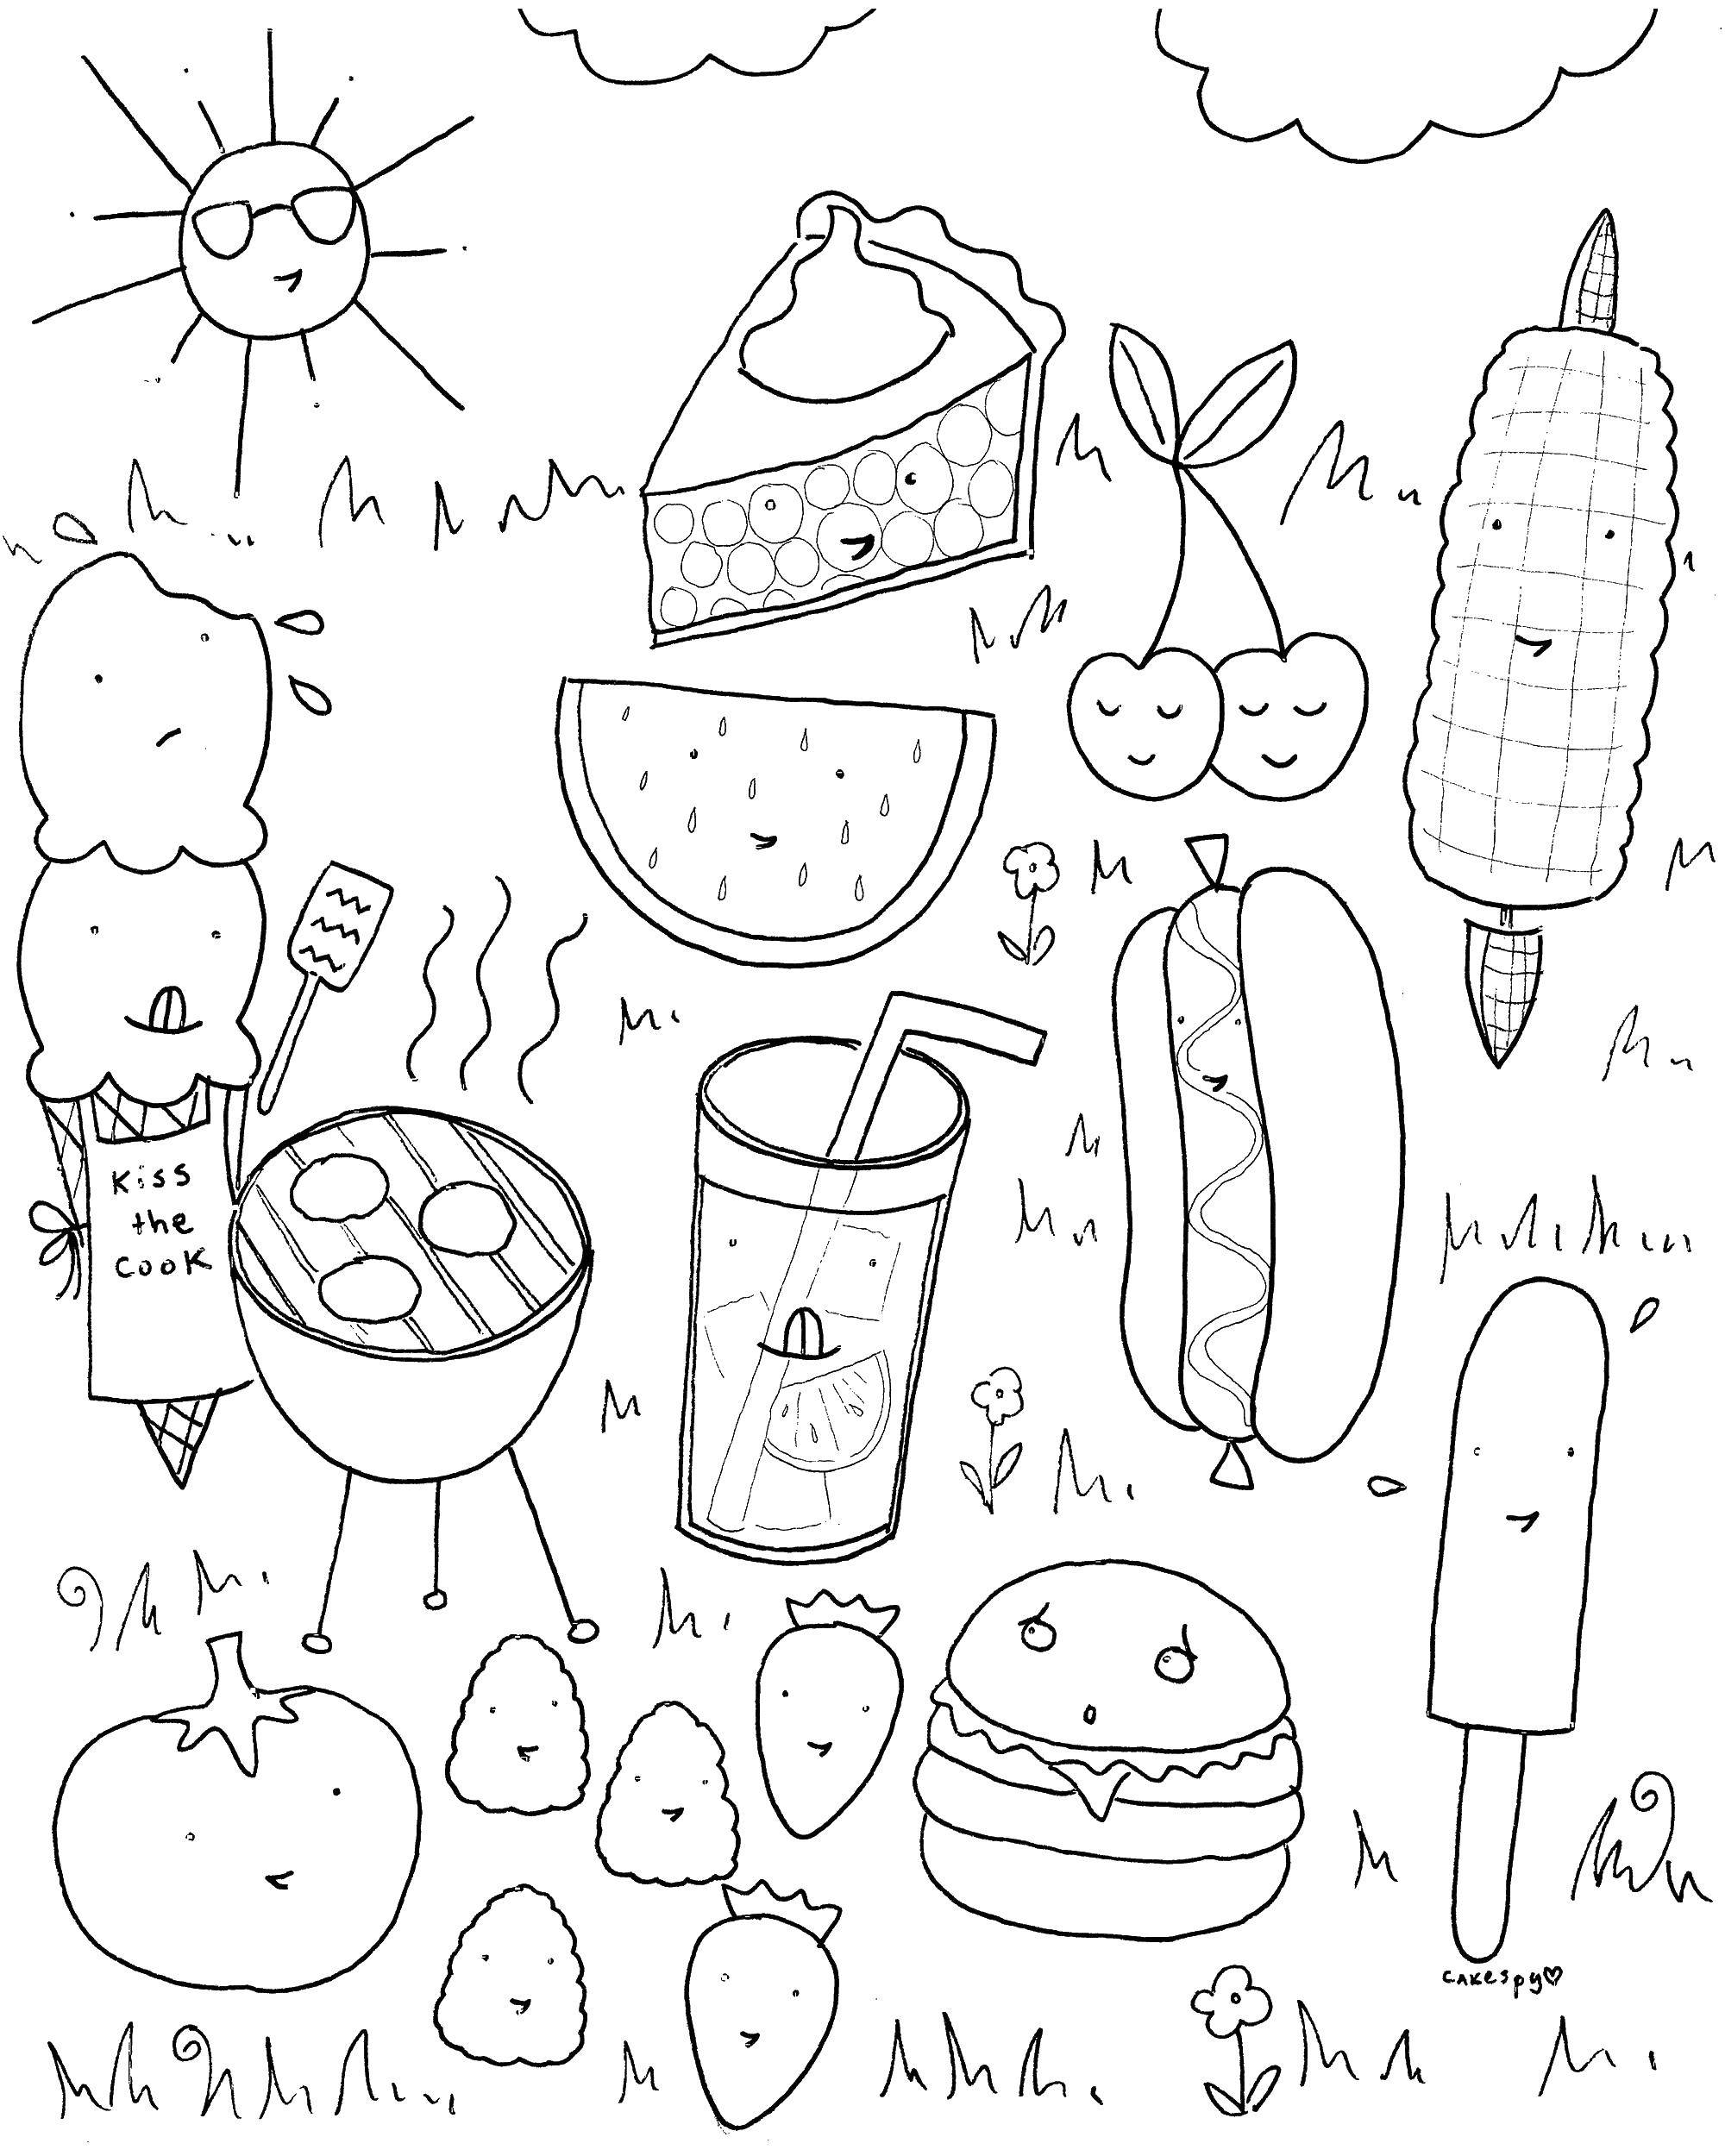 Coloring Summer food. Category Summer fun. Tags:  summer, food.